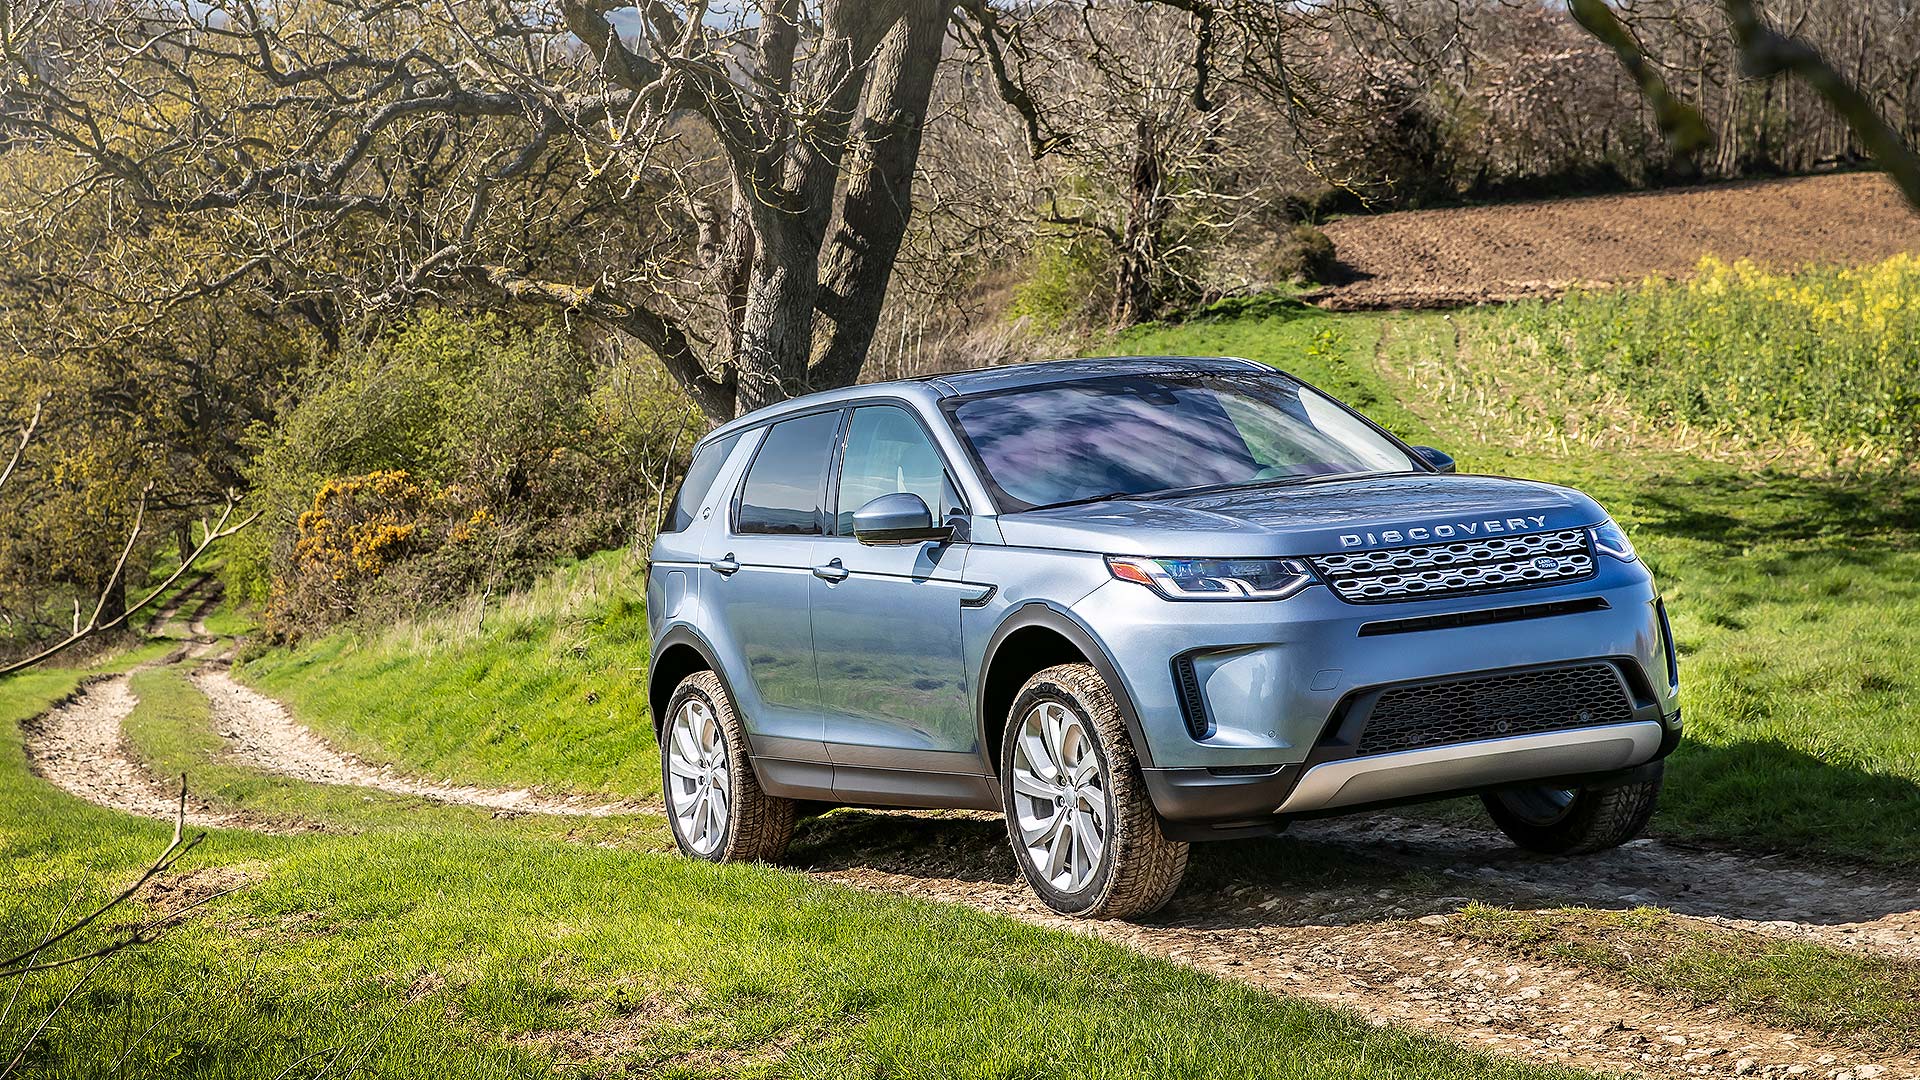 2020 Land Rover Discovery Sport revealed Far more than a